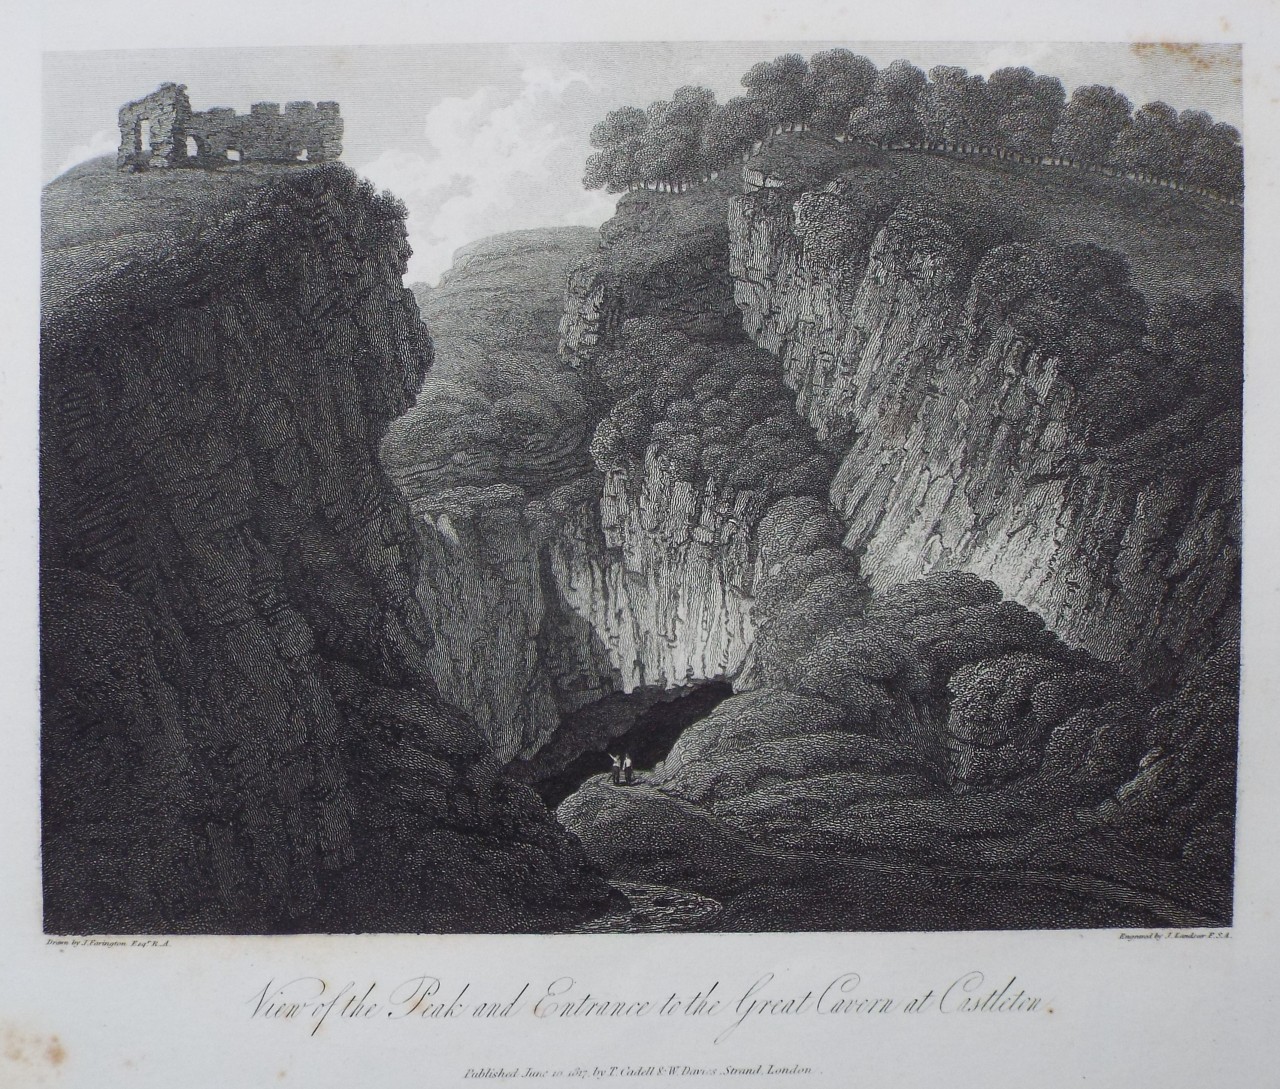 Print - View of the Peak and Entrance to the Great Cavern at Castleton. - Landseer